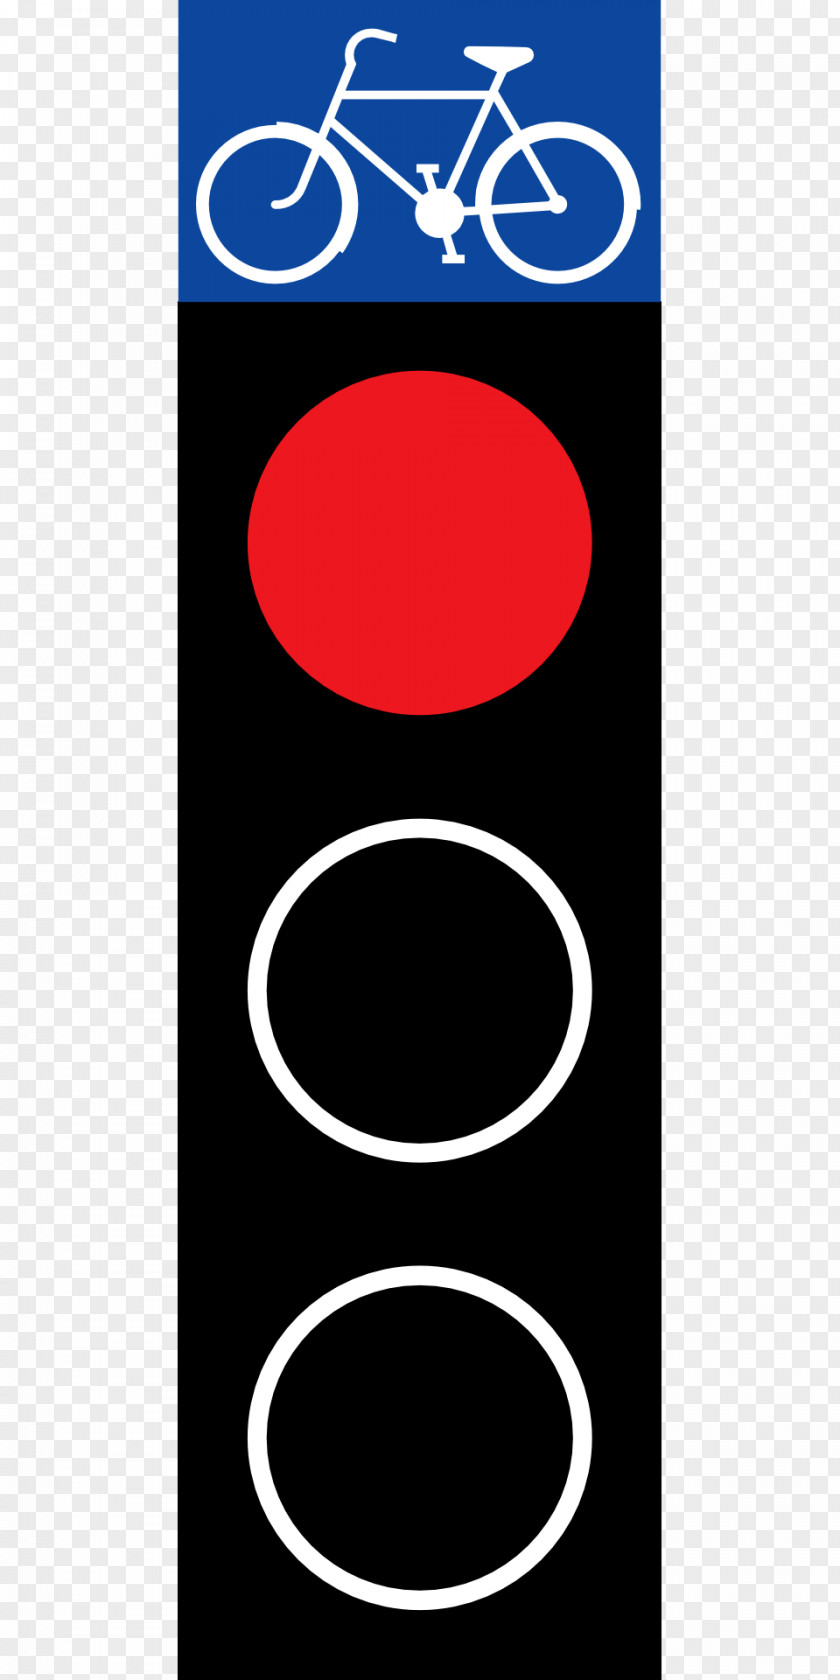 Traffic Light Bicycle Road Sign PNG